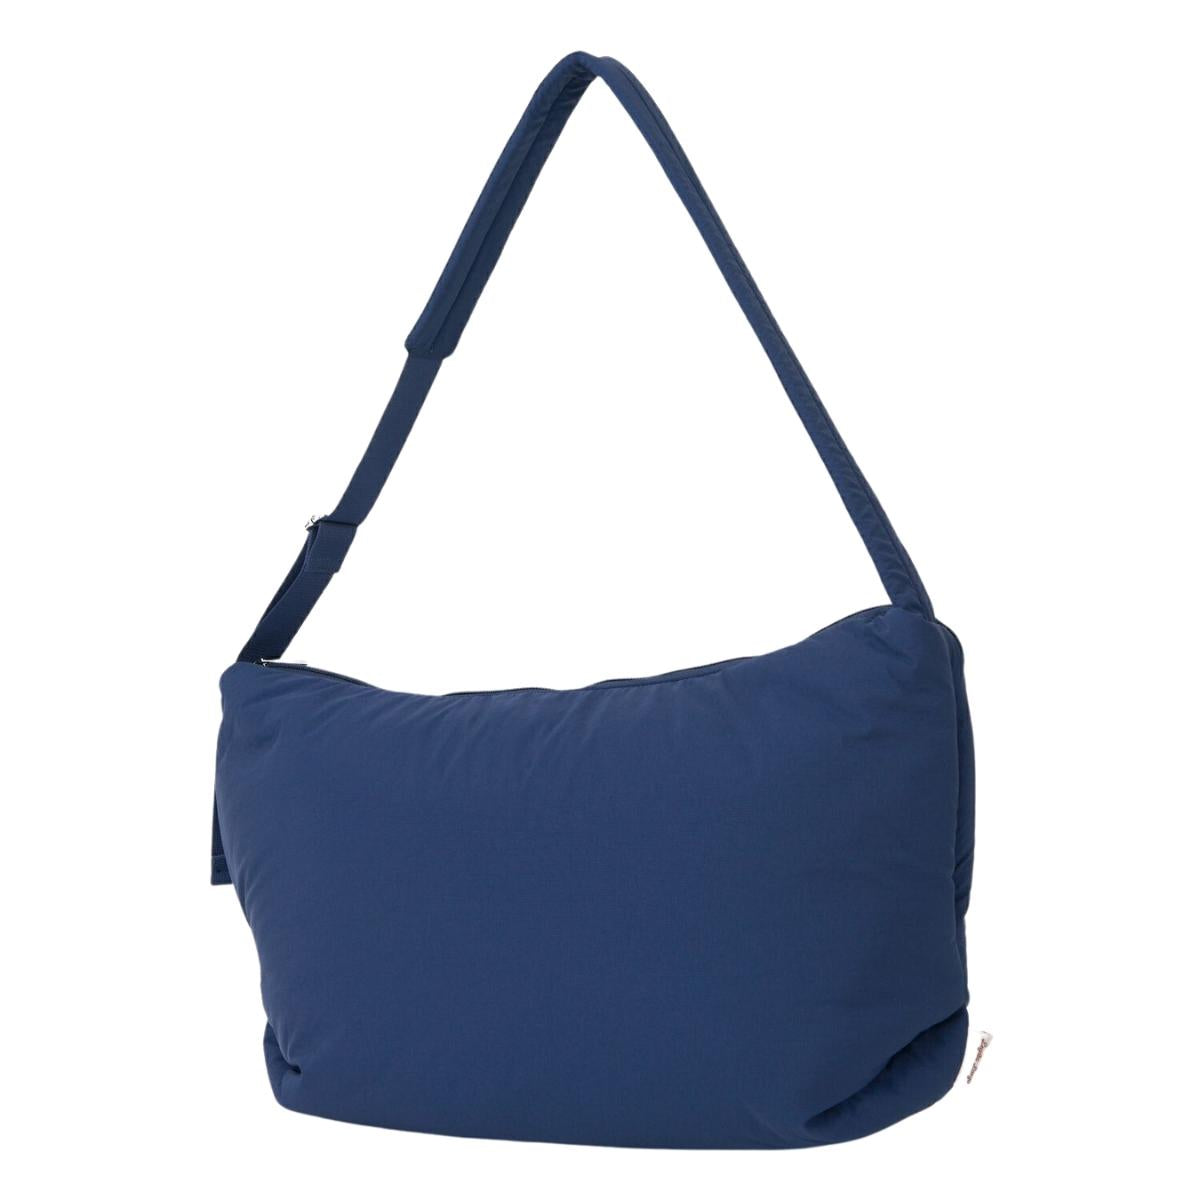 Anello Legato Cloud Hammock Bag Large in Navy